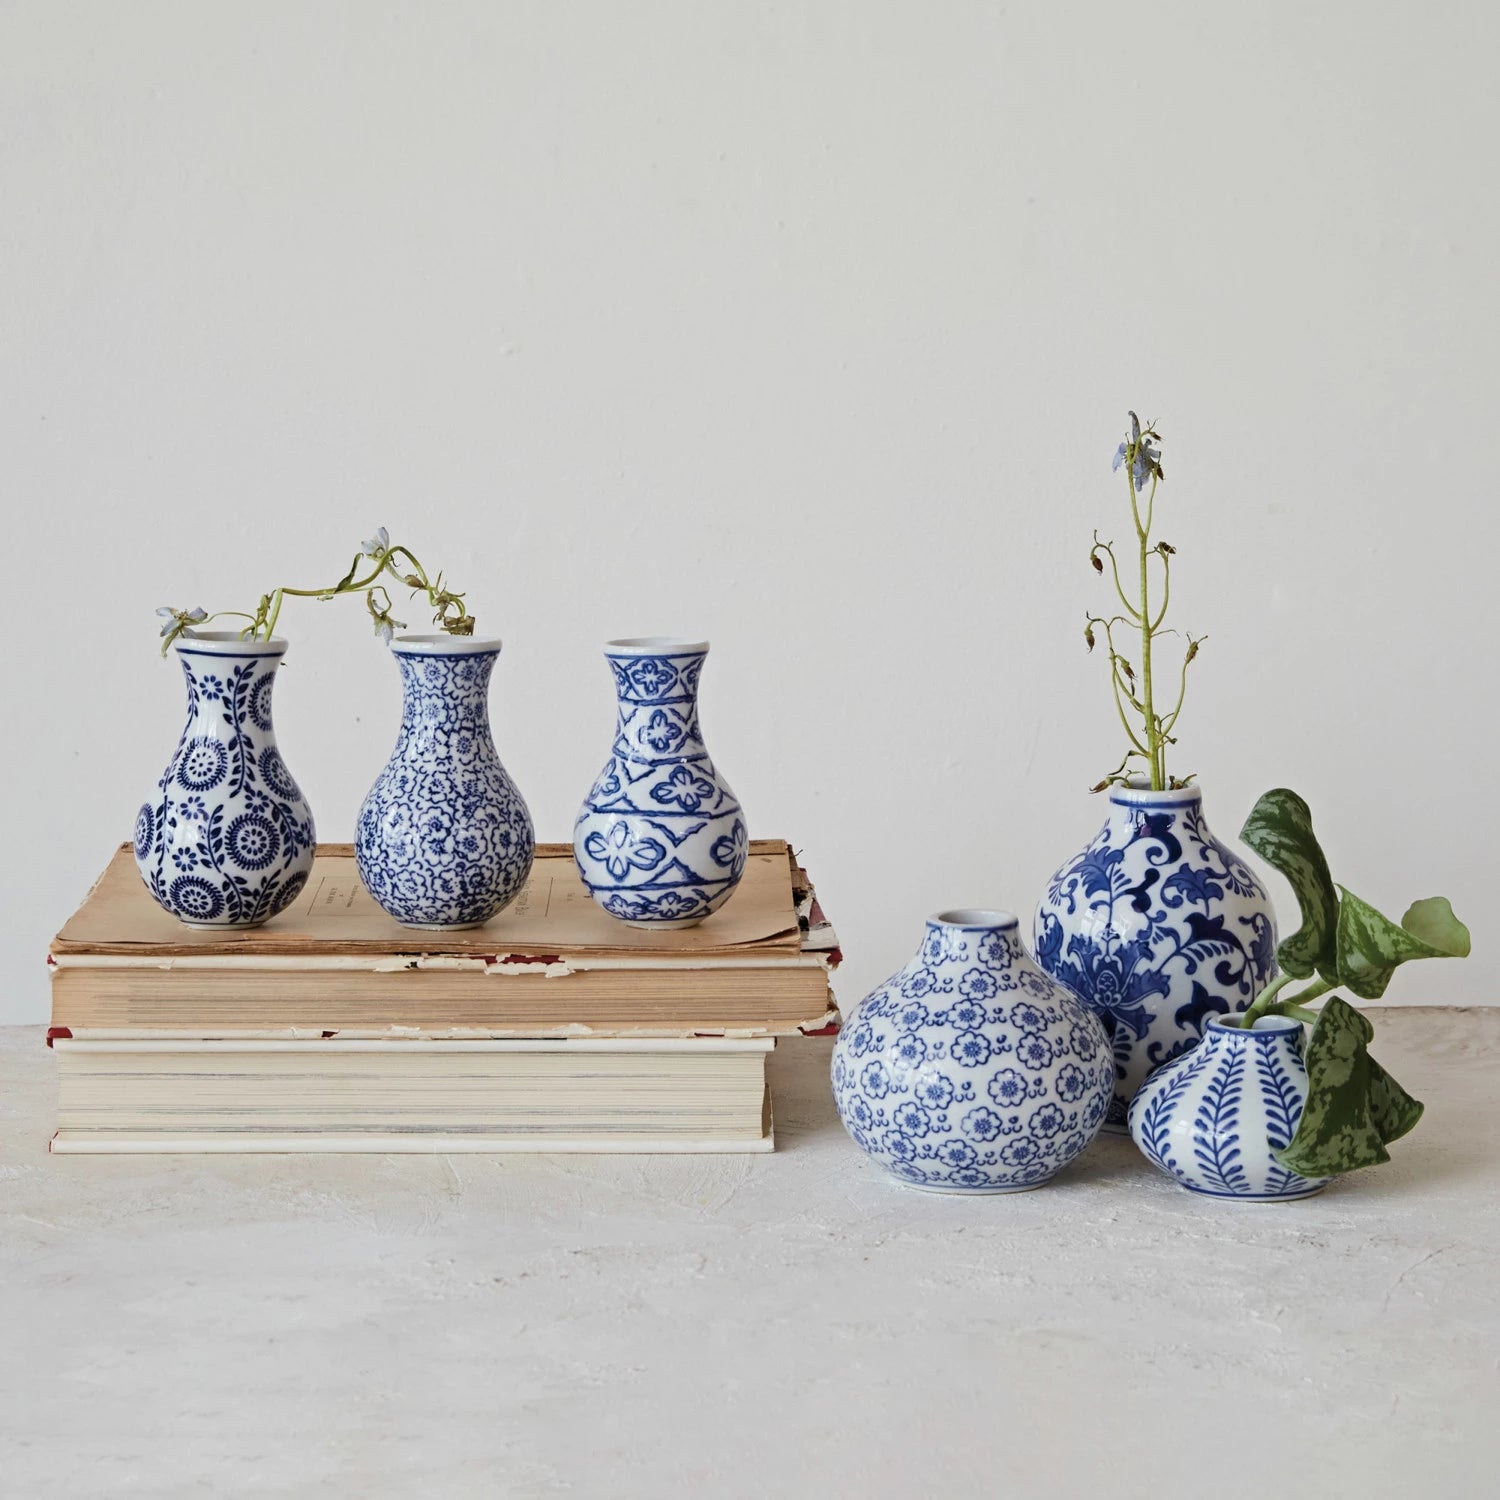 assorted blue and white vases arranged on a shelf with books and greenery.